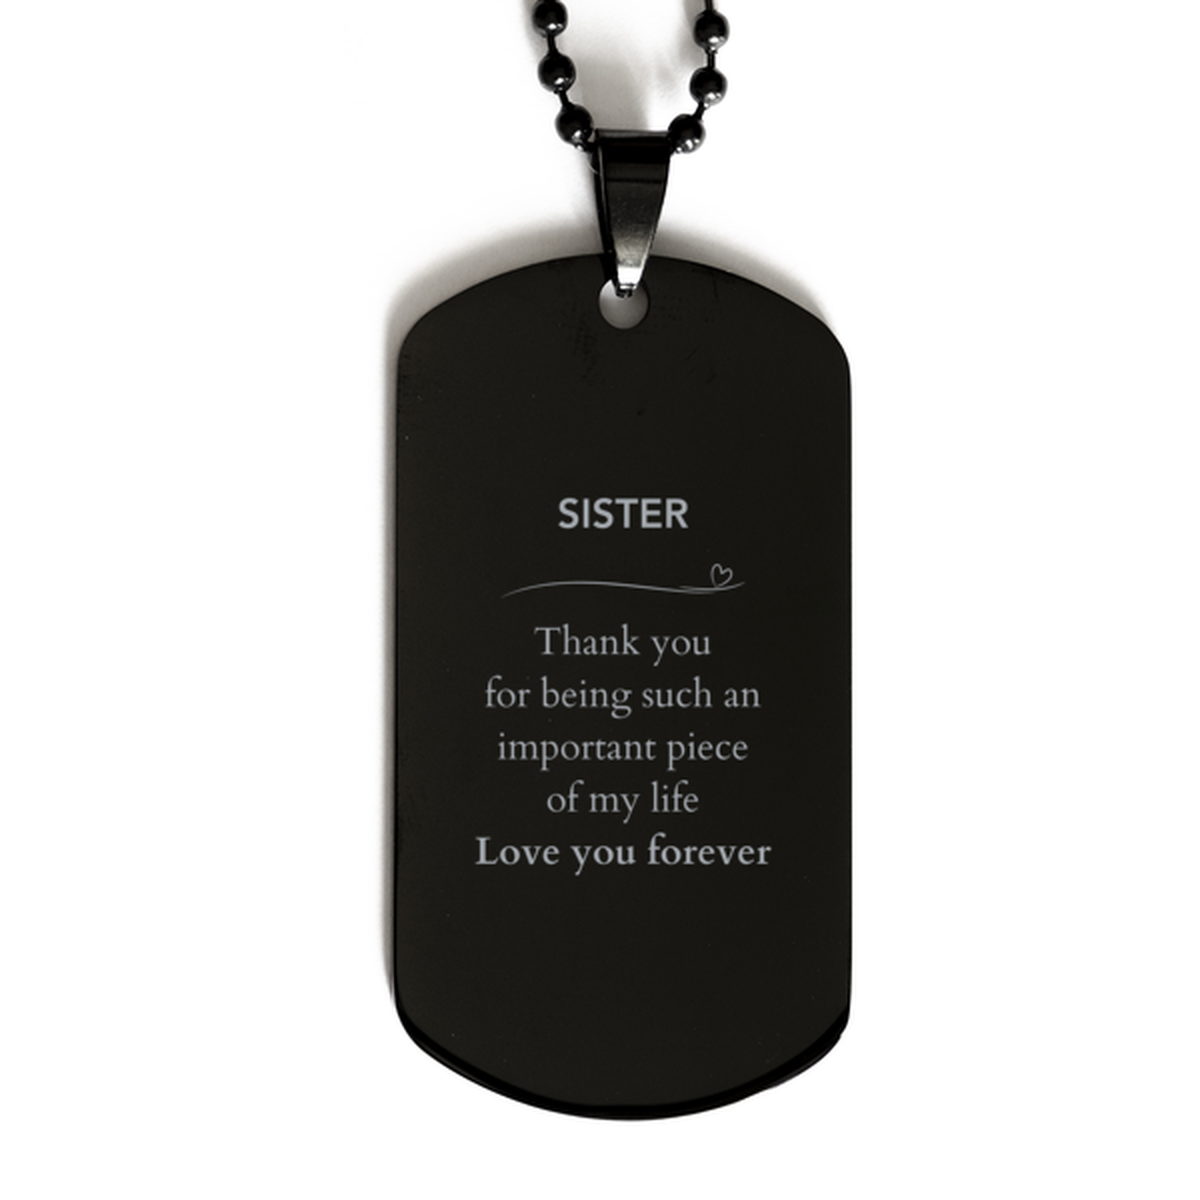 Appropriate Sister Black Dog Tag Epic Birthday Gifts for Sister Thank you for being such an important piece of my life Sister Christmas Mothers Fathers Day